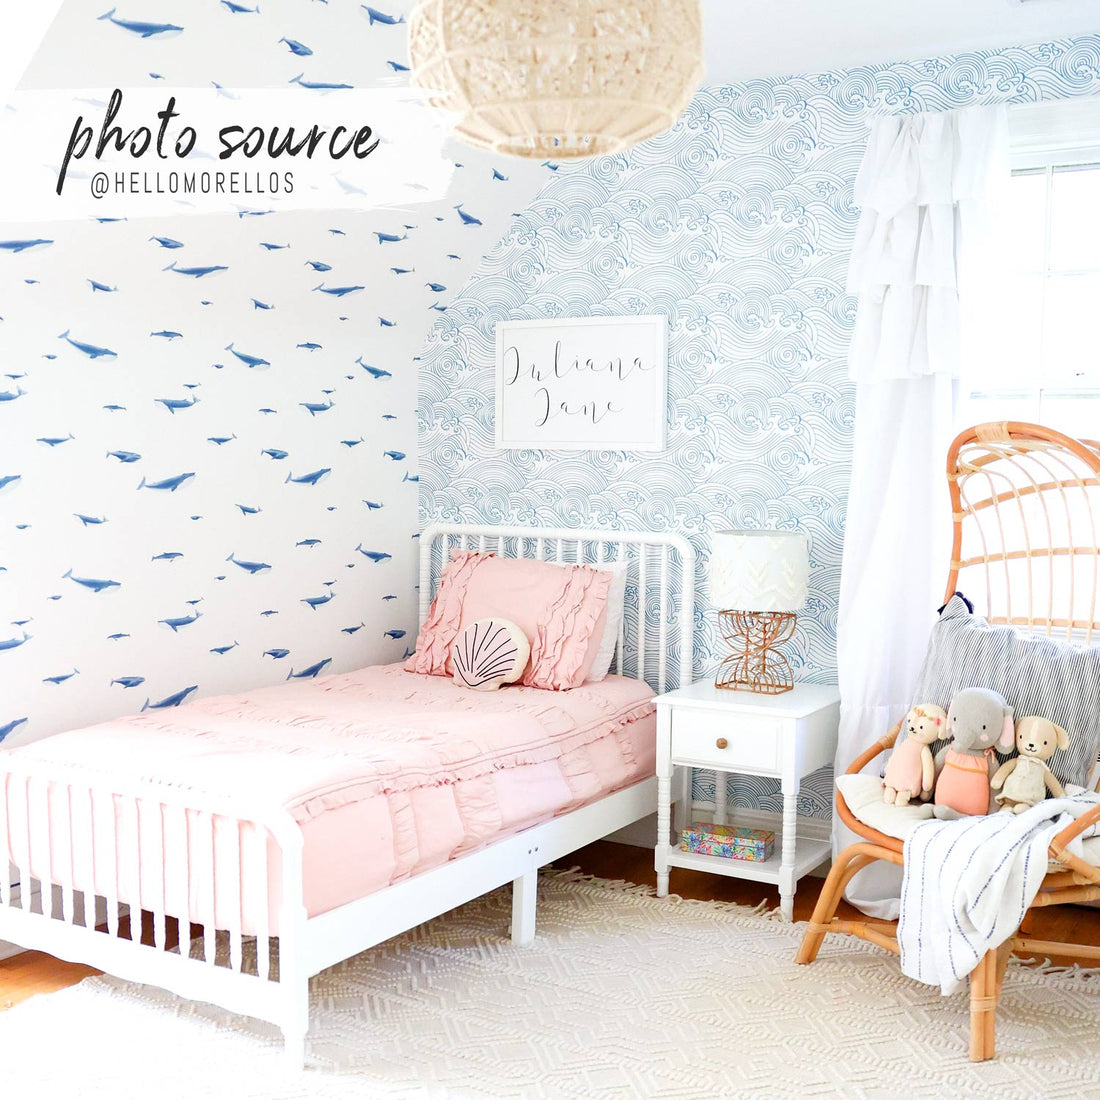 beach house inspired kids bedroom interior with light blue waves pattern wallpaper